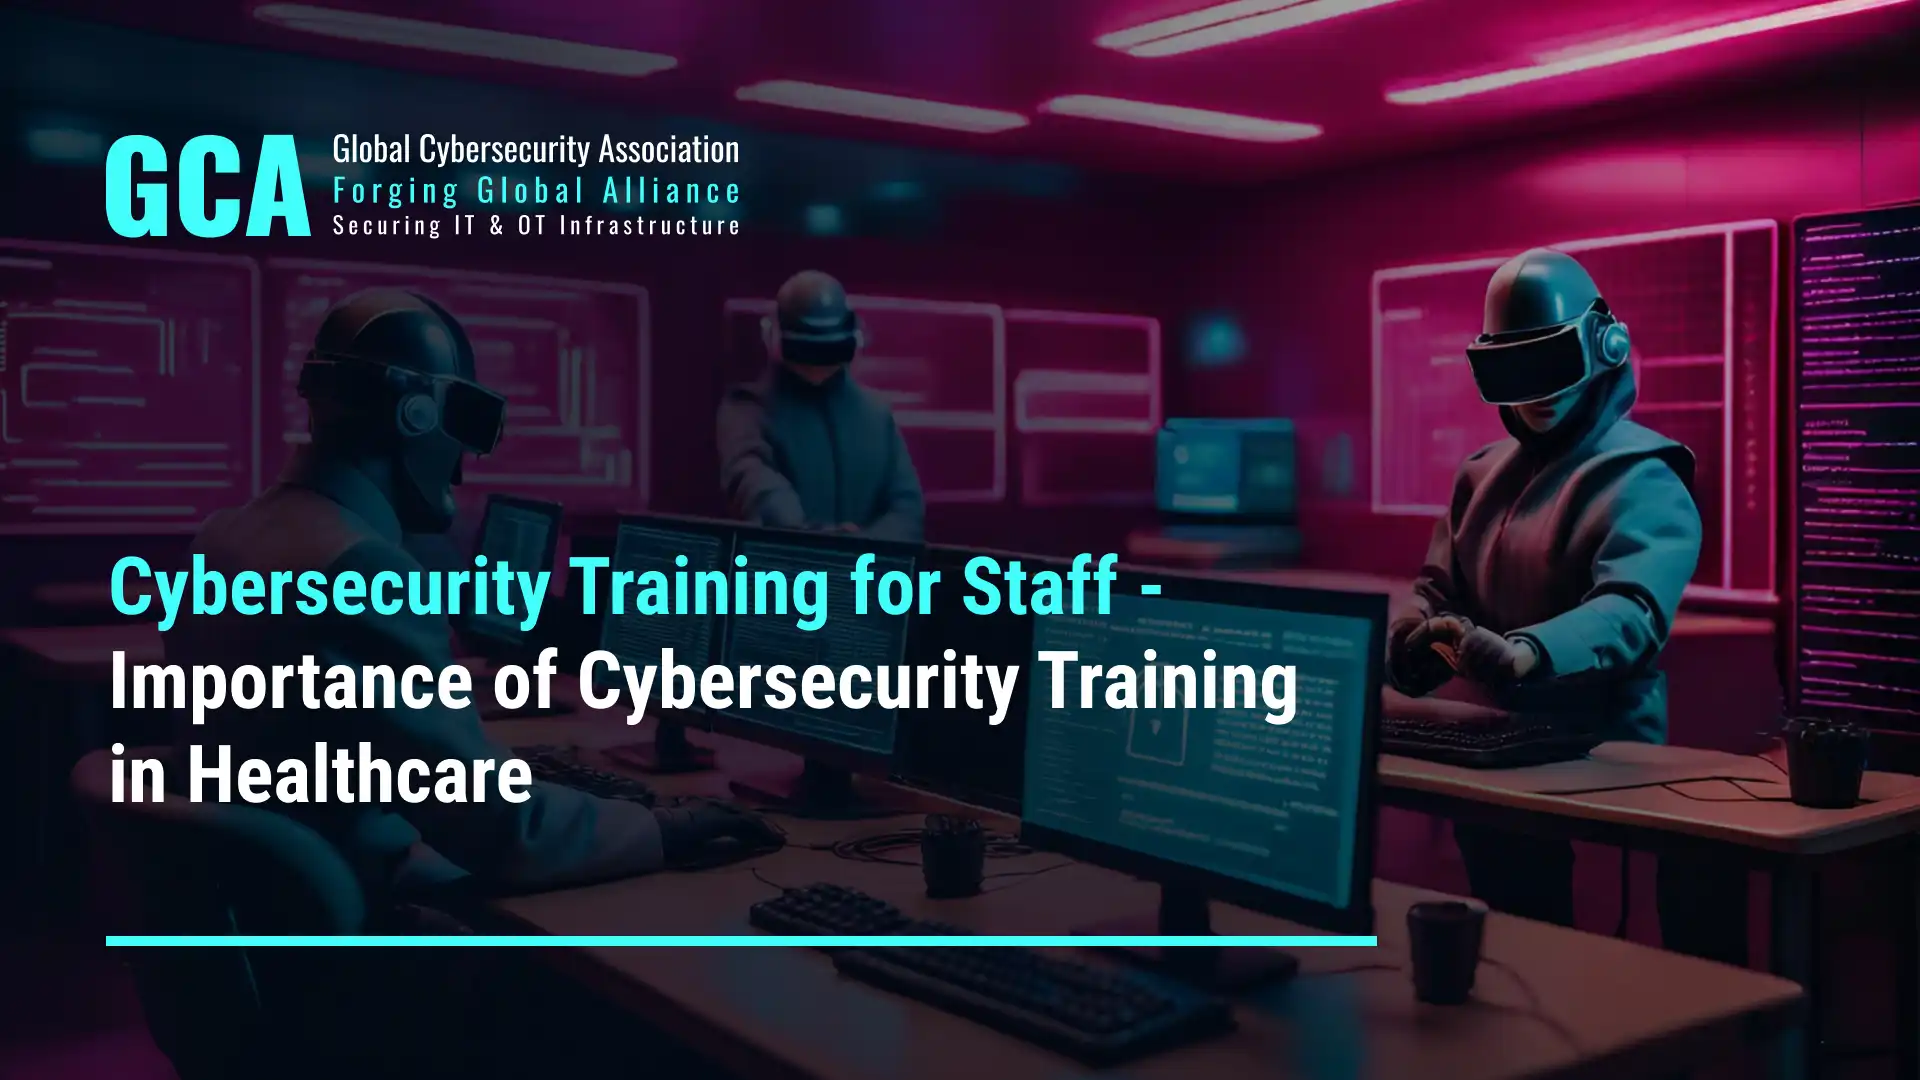 Cybersecurity Training for Staff - Importance of Cybersecurity Training in Healthcare